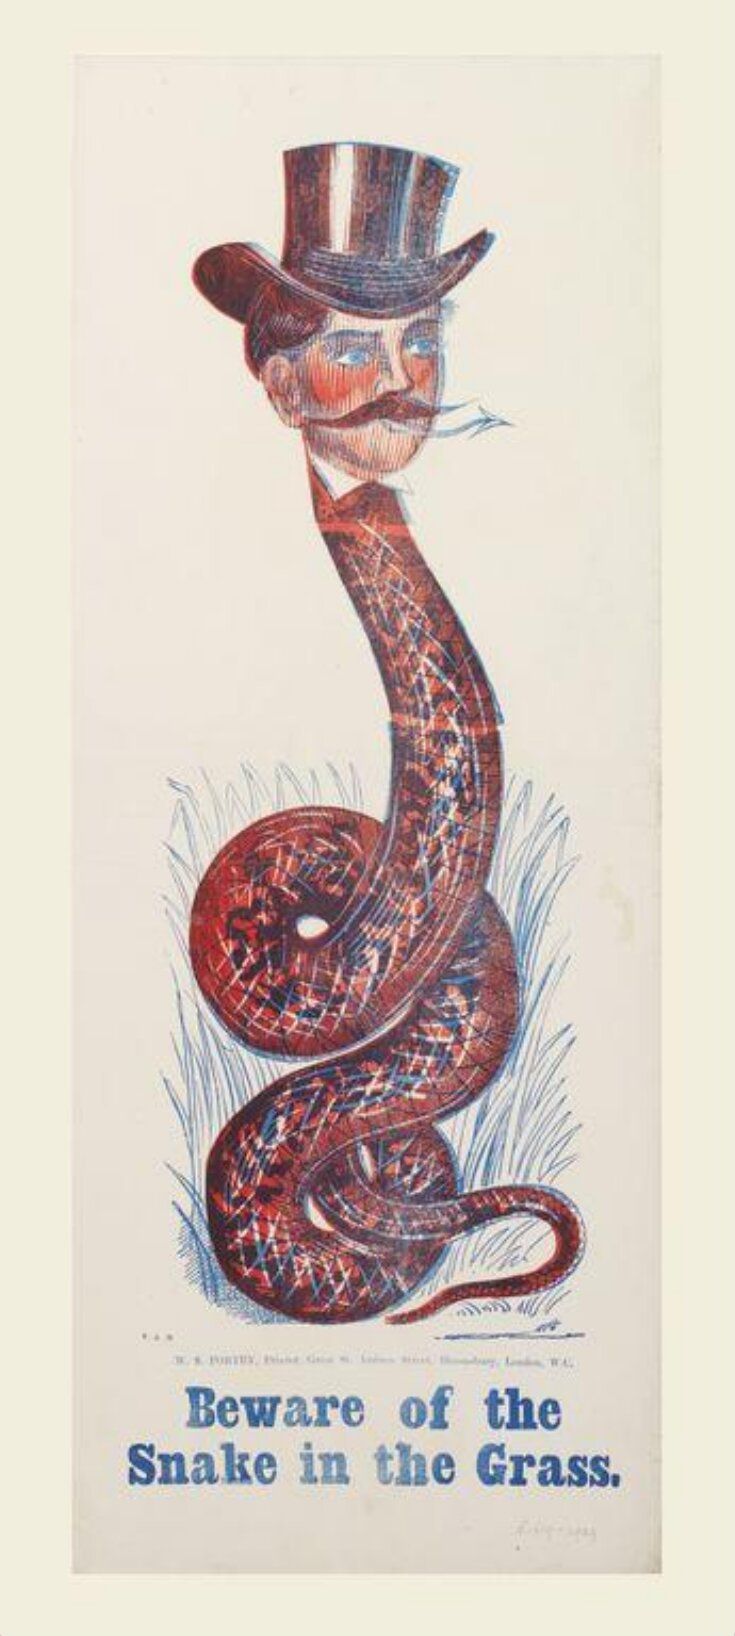 Comic valentine depicting a coiled snake with the head of a gentleman wearing a top hat, and the caption 'Beware of the Snake in the Grass'.